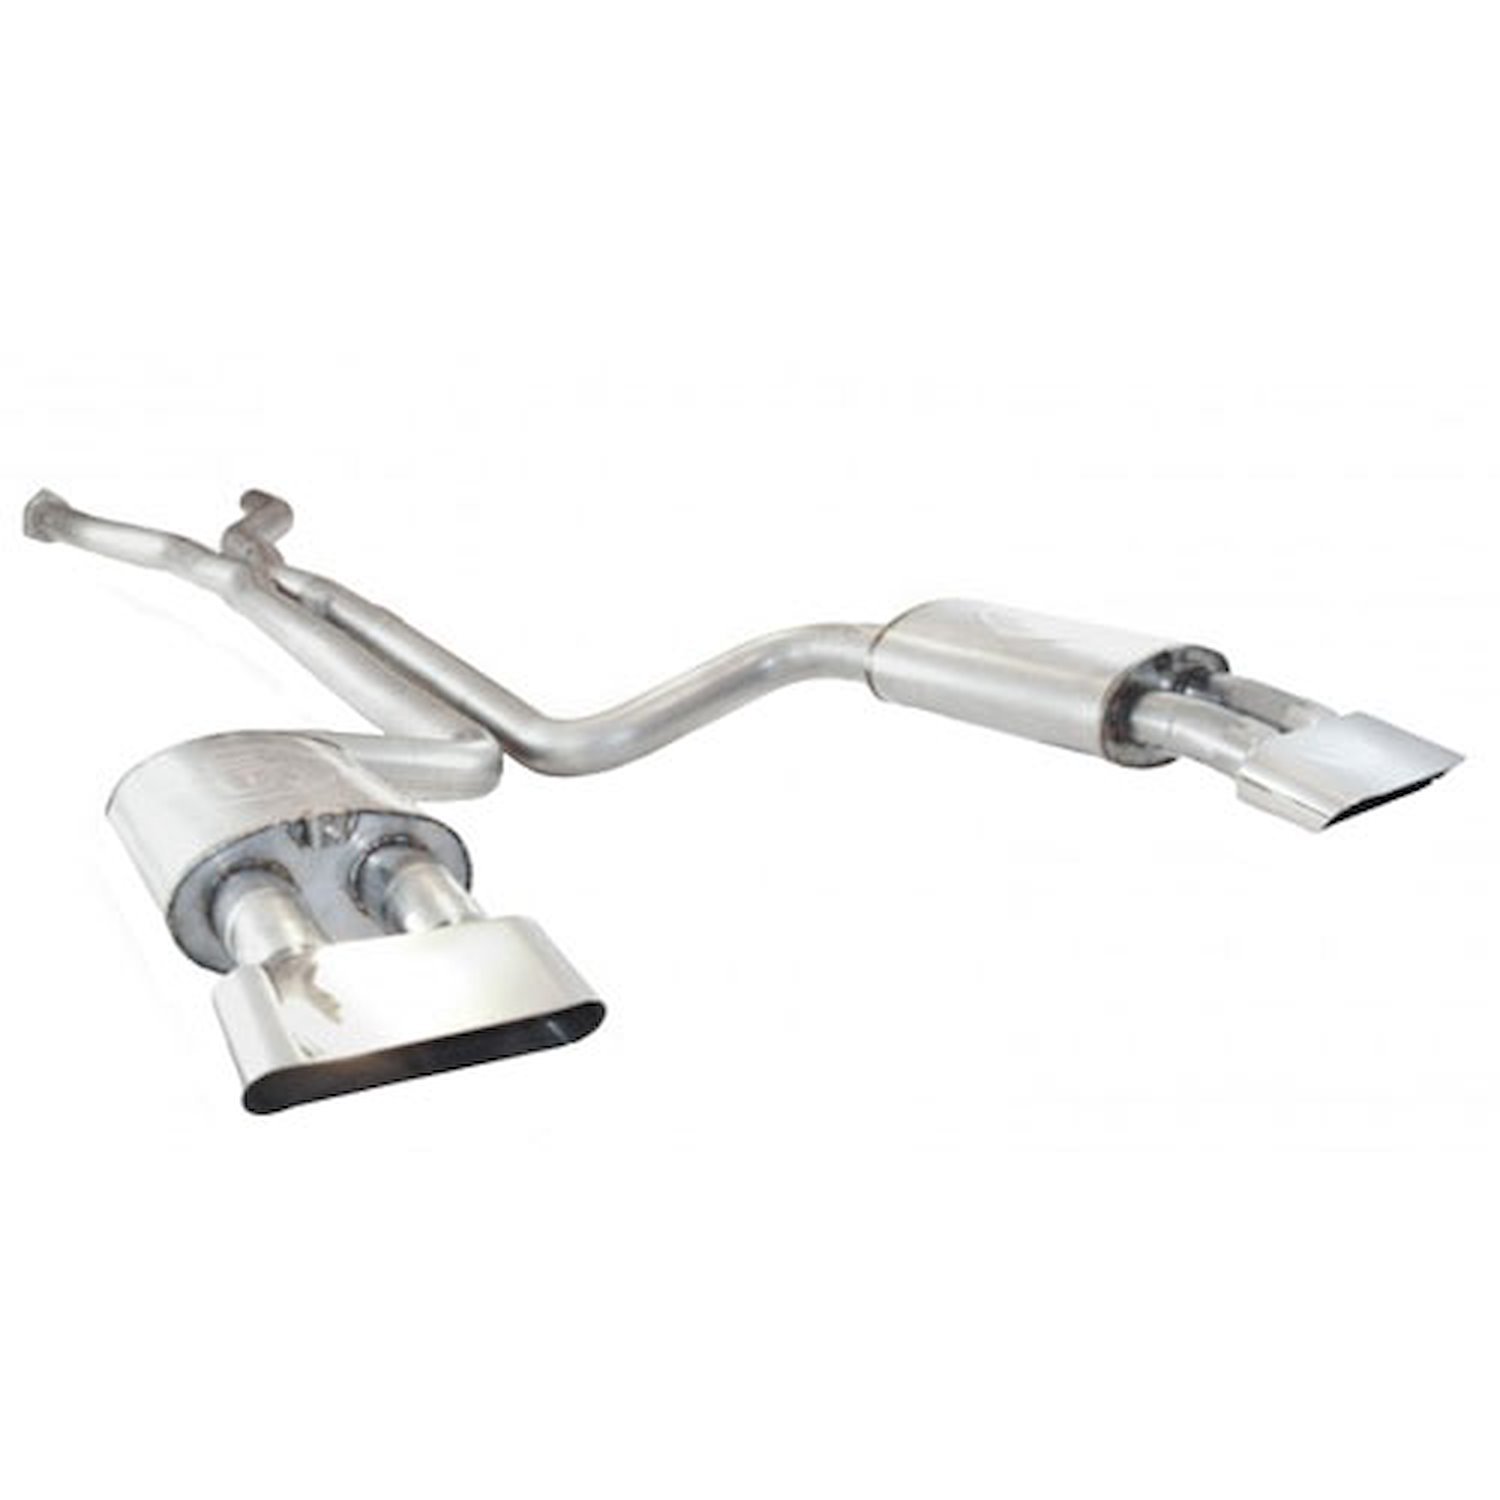 1990-1995 ZR1 3 aggressive sounding exhaust system to